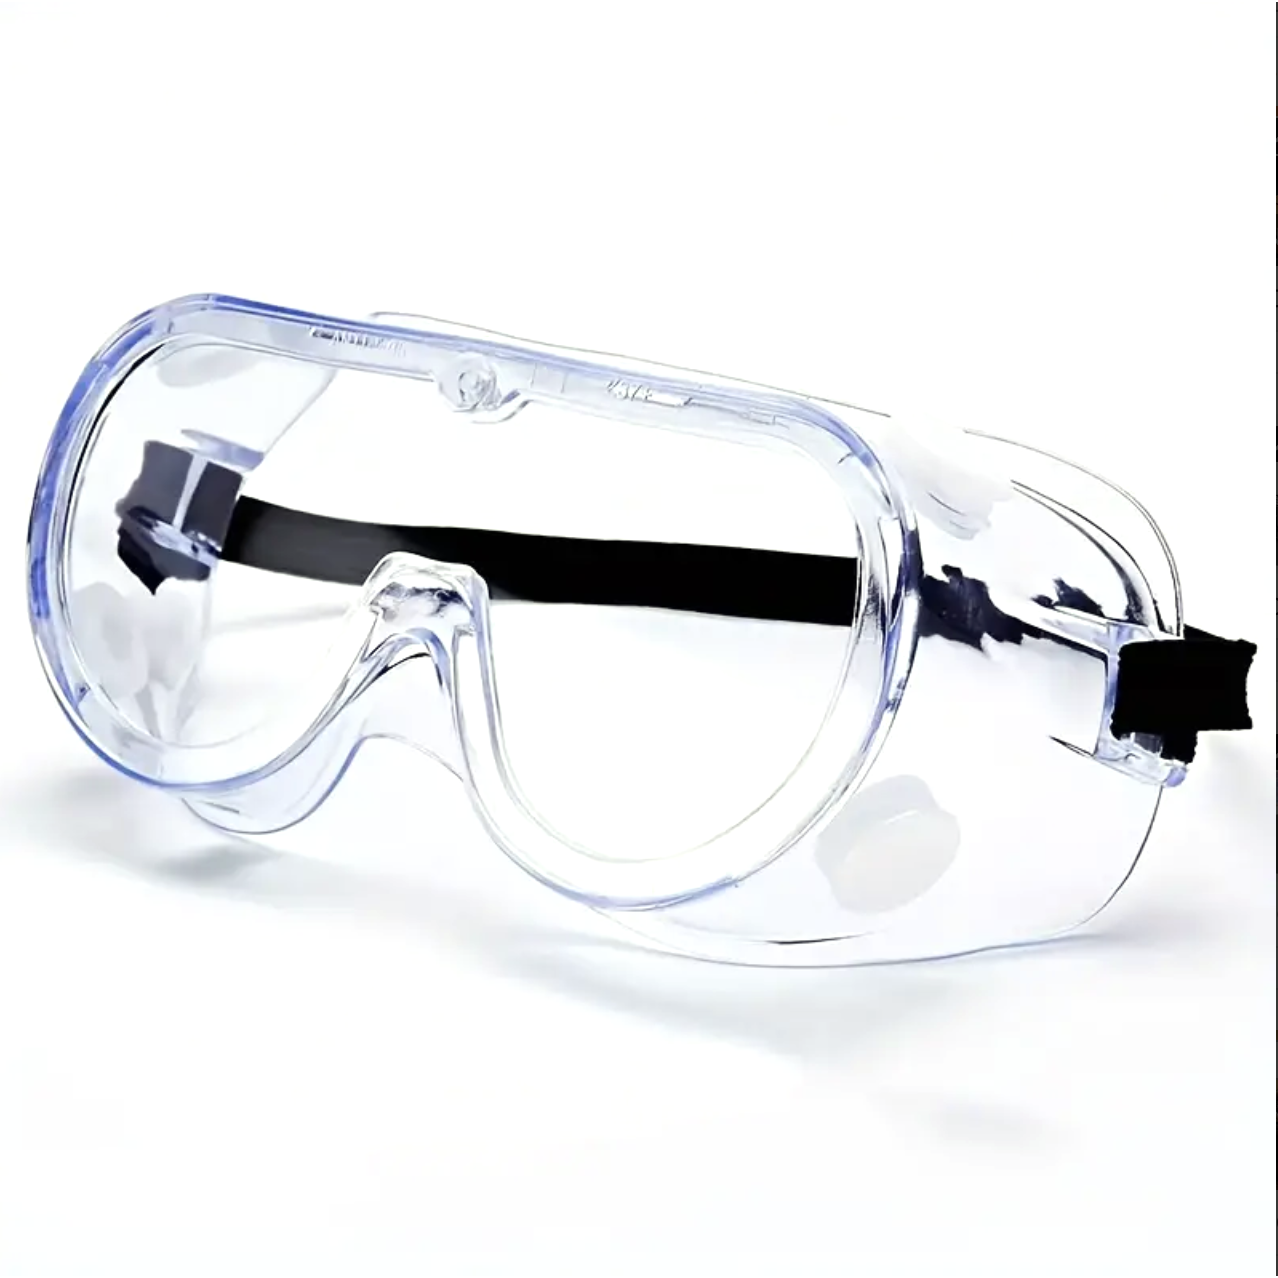 Laboratory glasses | Safety Goggles for Parties Party Owl Supplies Deinparadies.ch